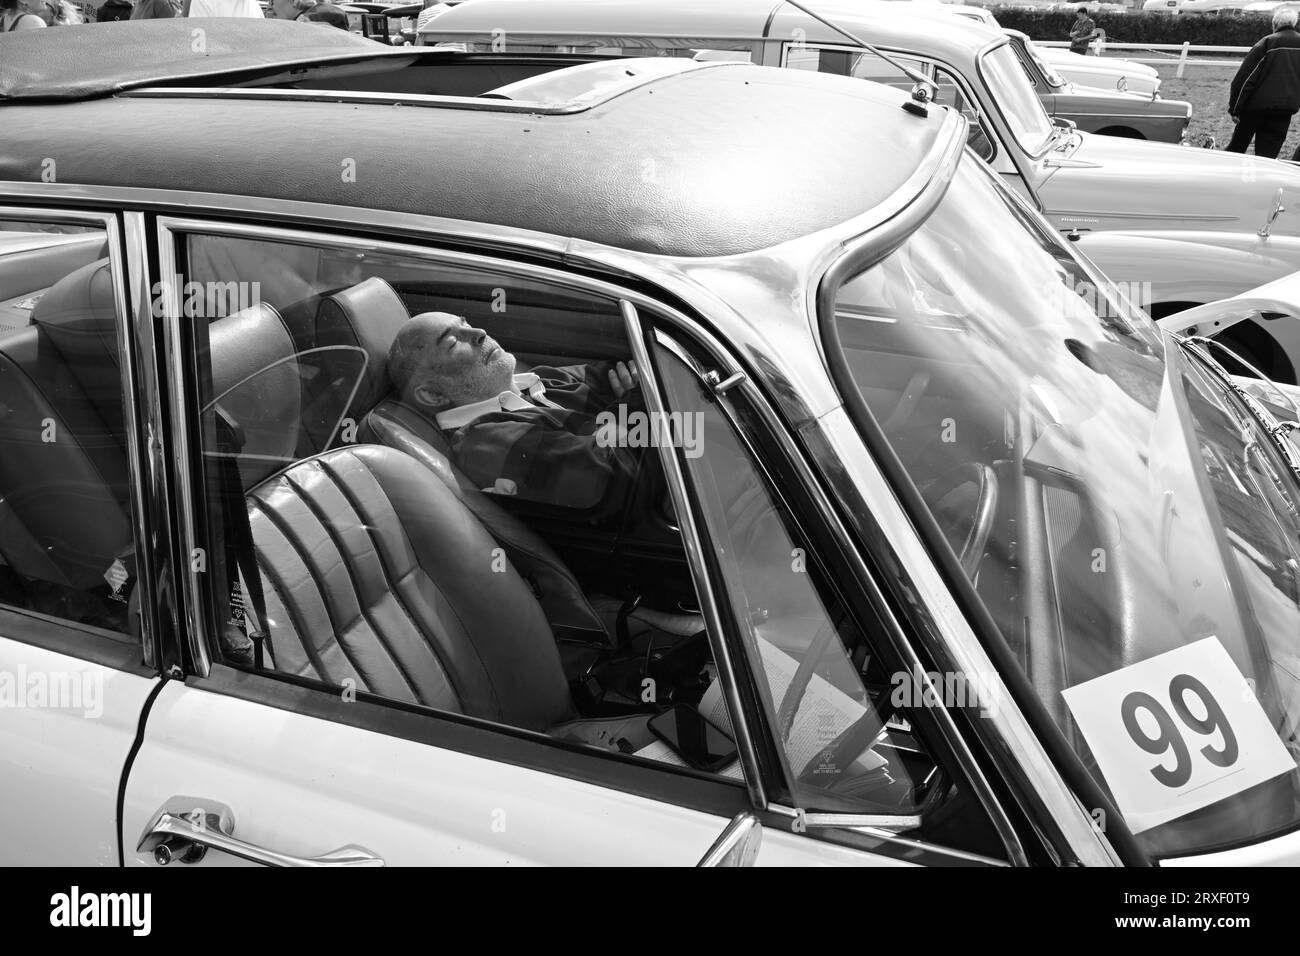 Stithians Steam Rally Exhibitor asleep in his car West of England Steam Engine Society Rally Show Cornwall Stock Photo